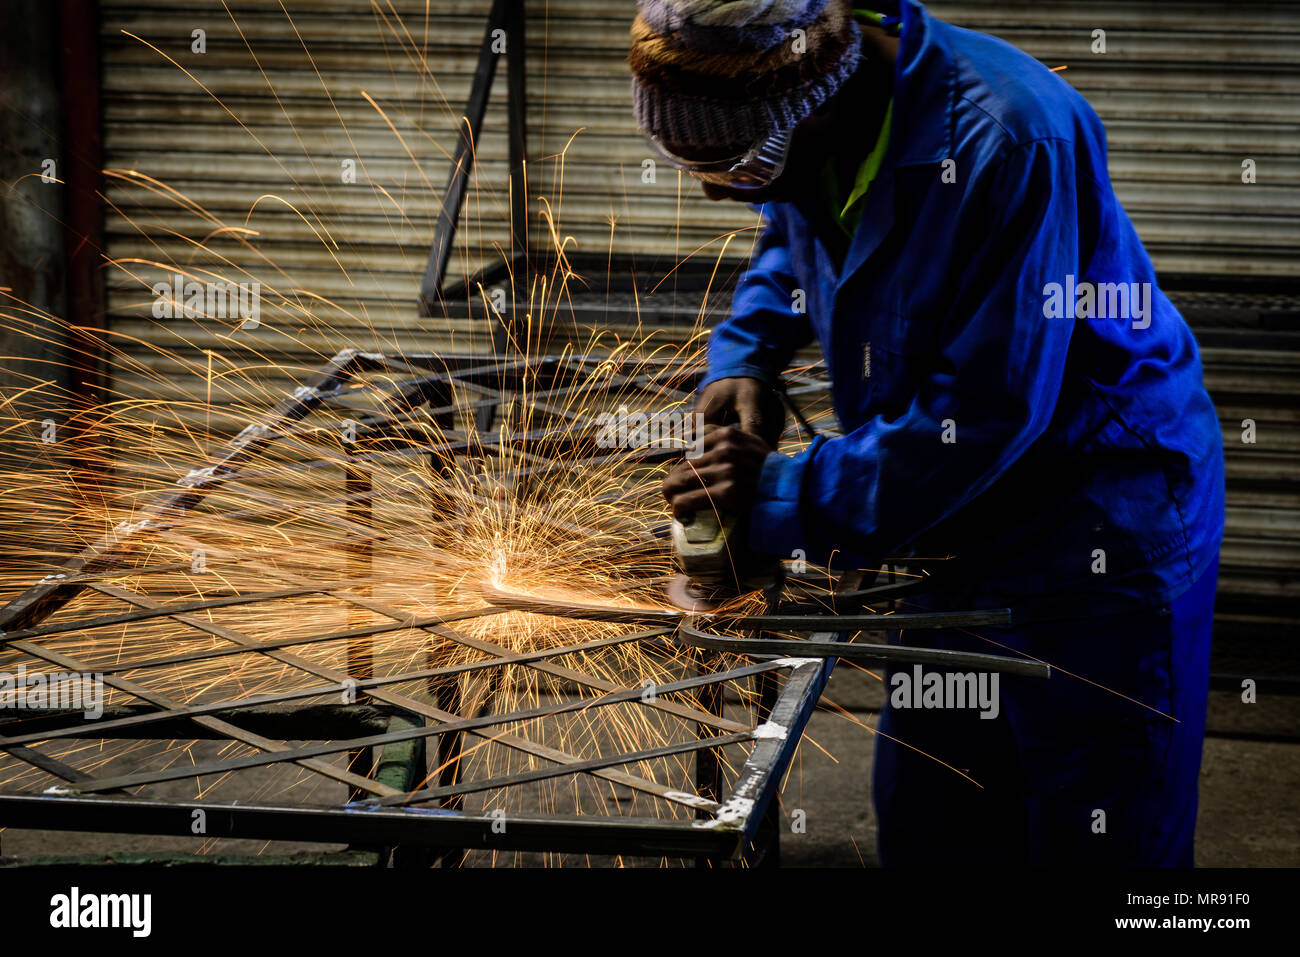 A metal worker on an Eastern Cape farm in South Africa. Farmers often establish small businesses to help pay for the costs of farming Stock Photo